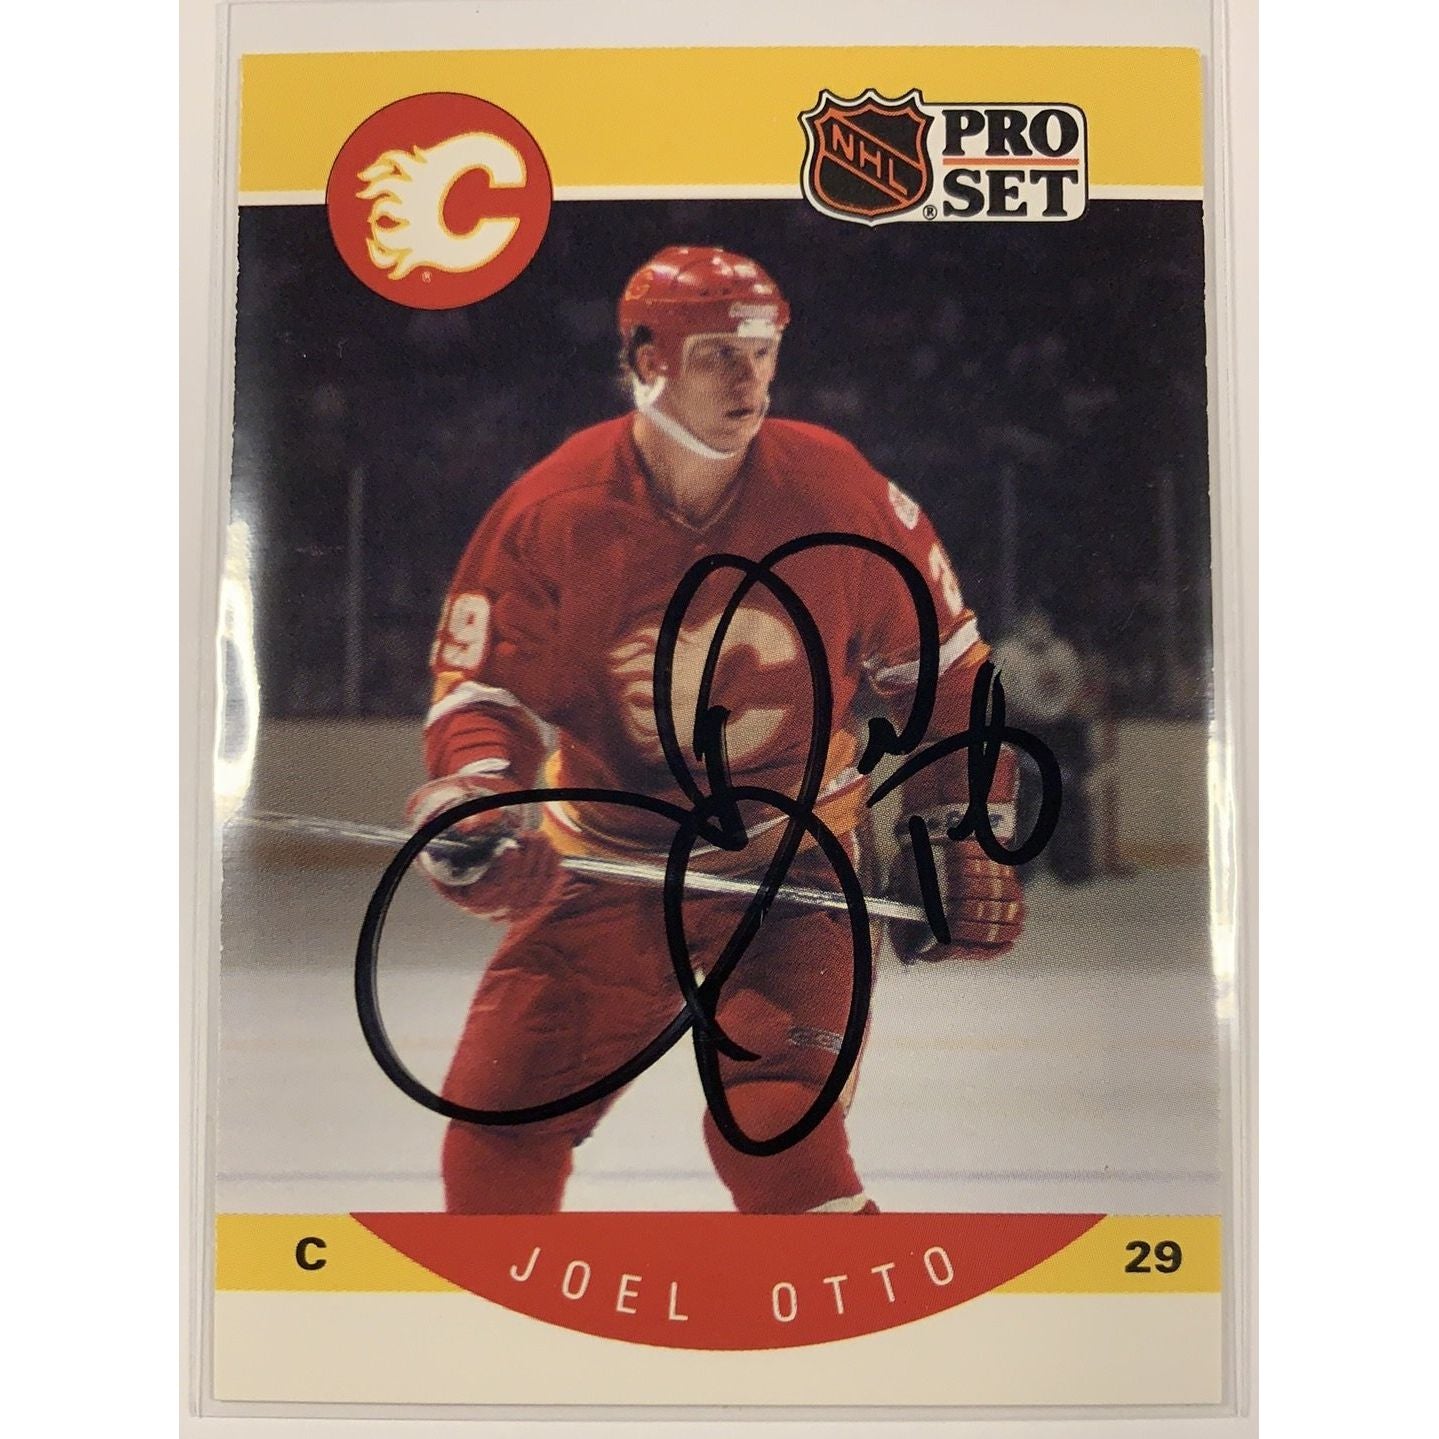  1990 Pro Set Joel Otto In Person Auto  Local Legends Cards & Collectibles